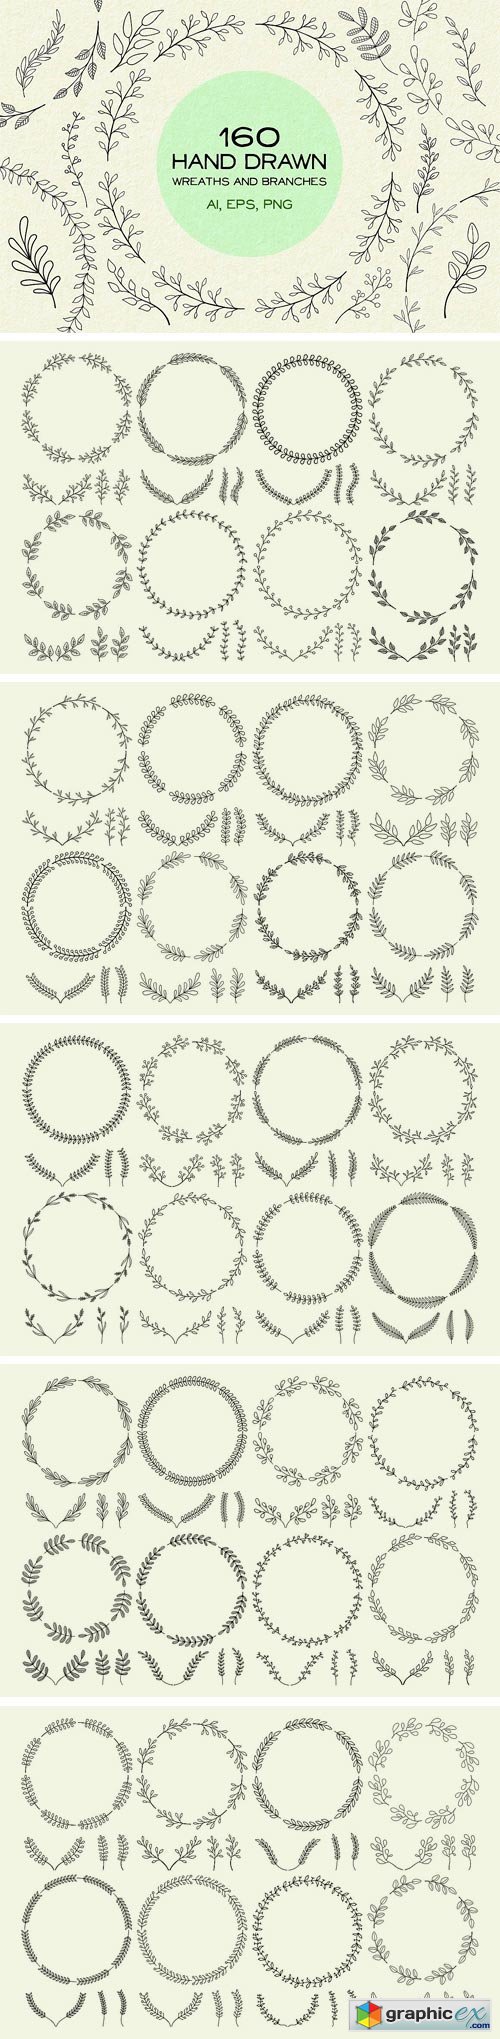 160 Hand Drawn Wreaths and Branches